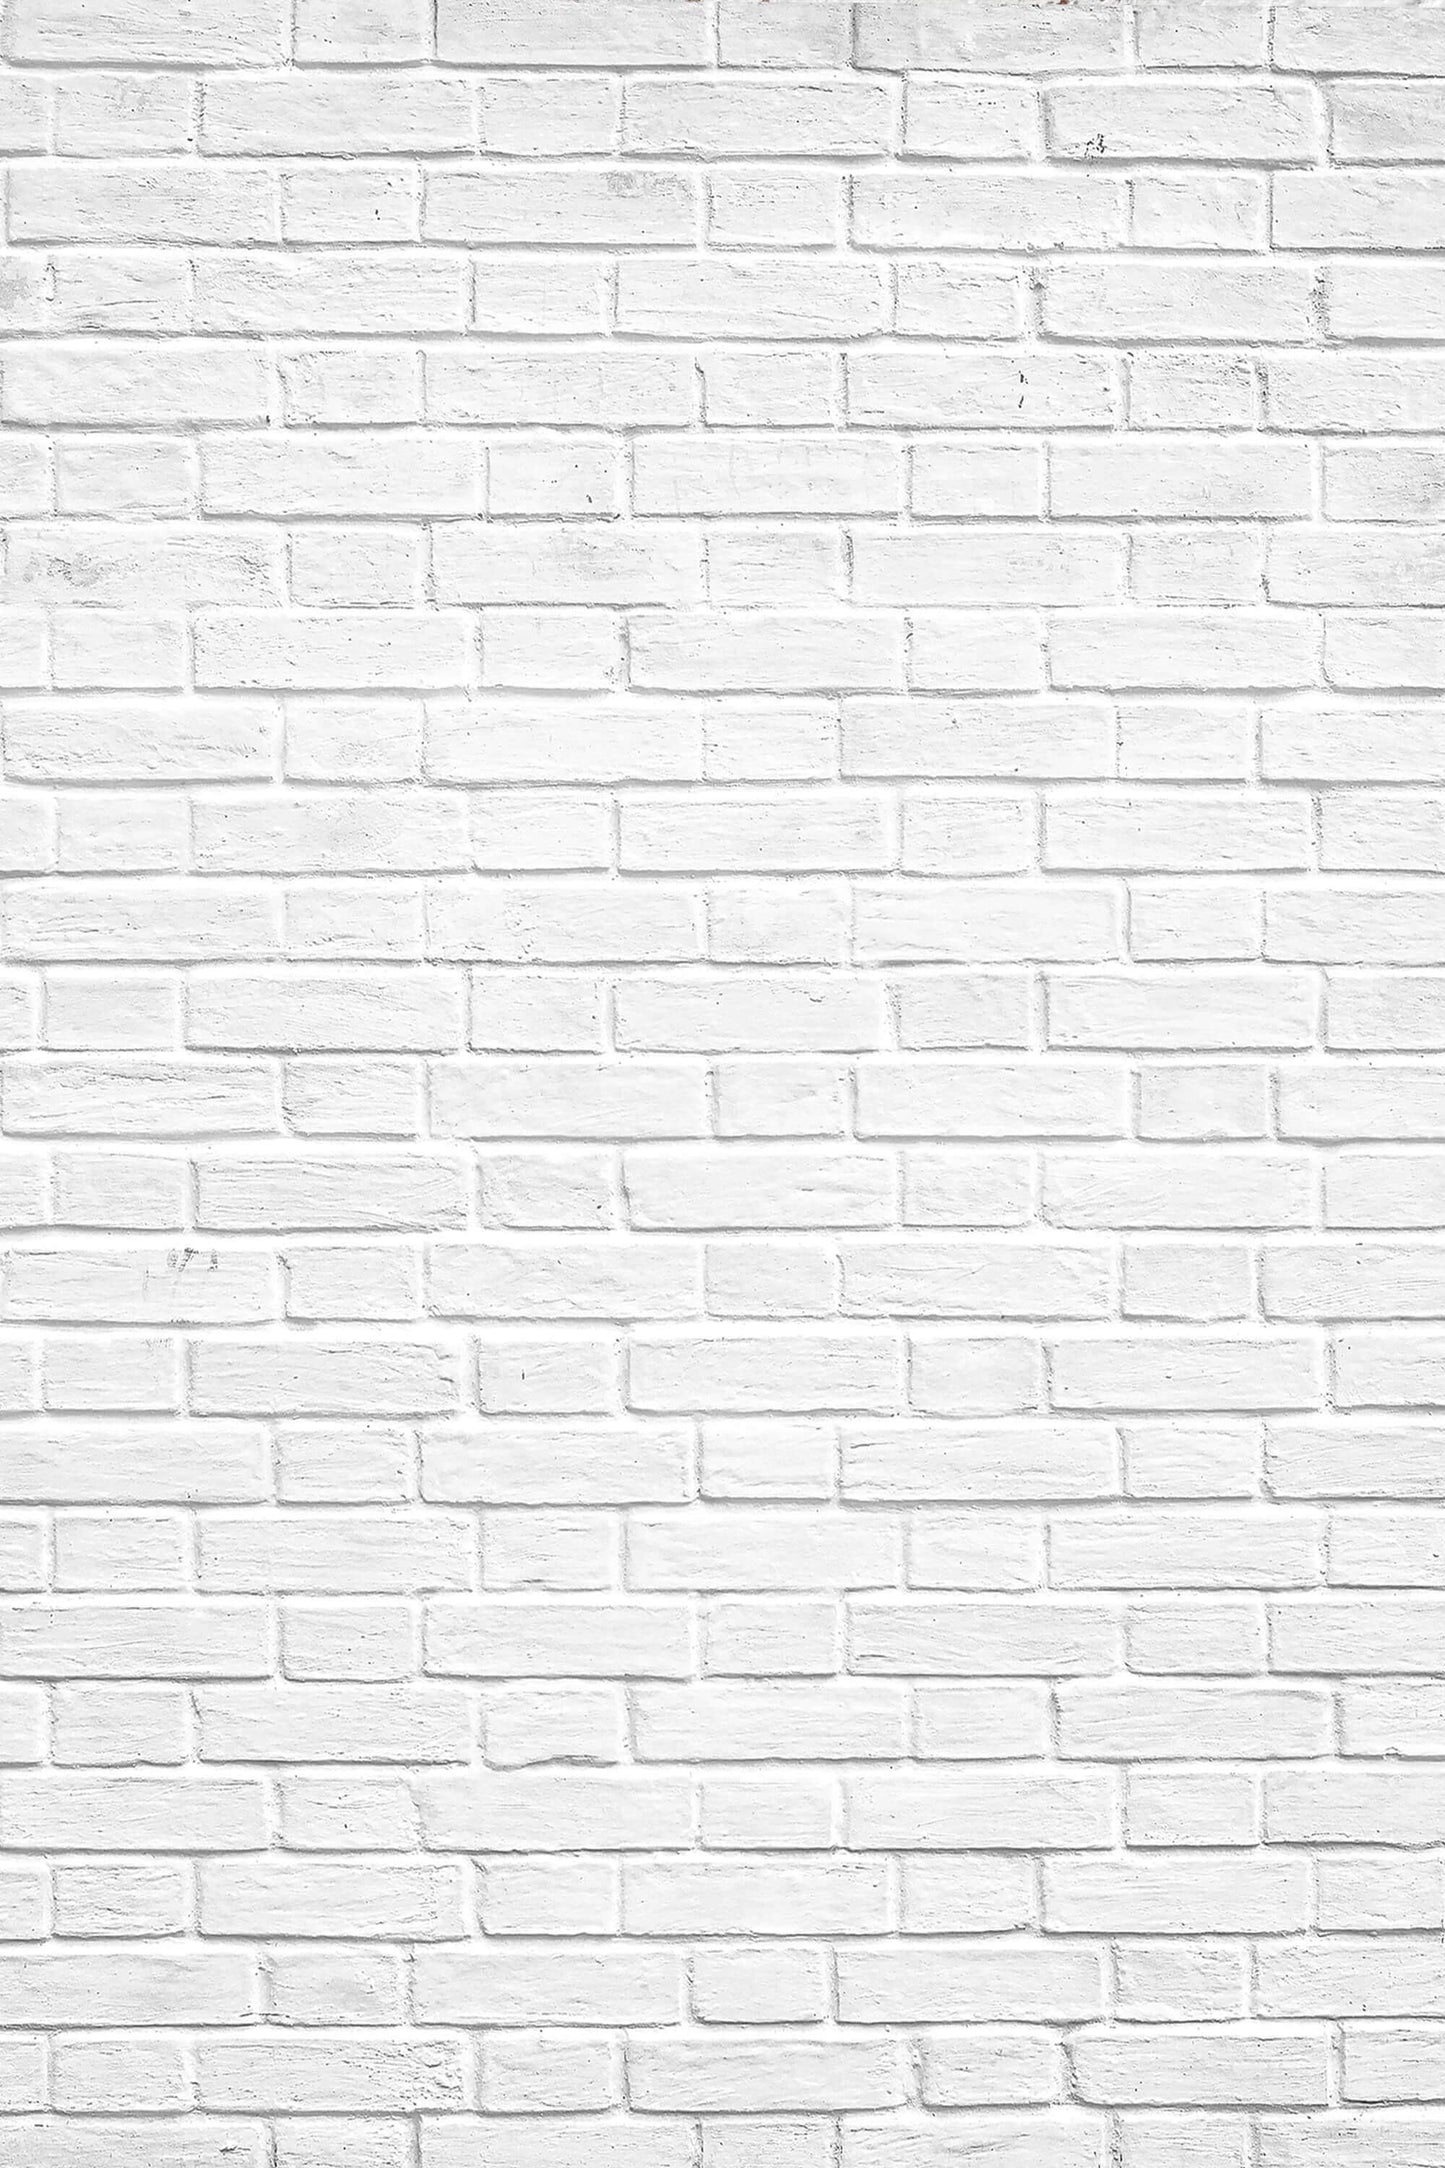 Collapsible Light Grey/White Brick Wall Double-sided Backdrop 5x6.5ft M12-78